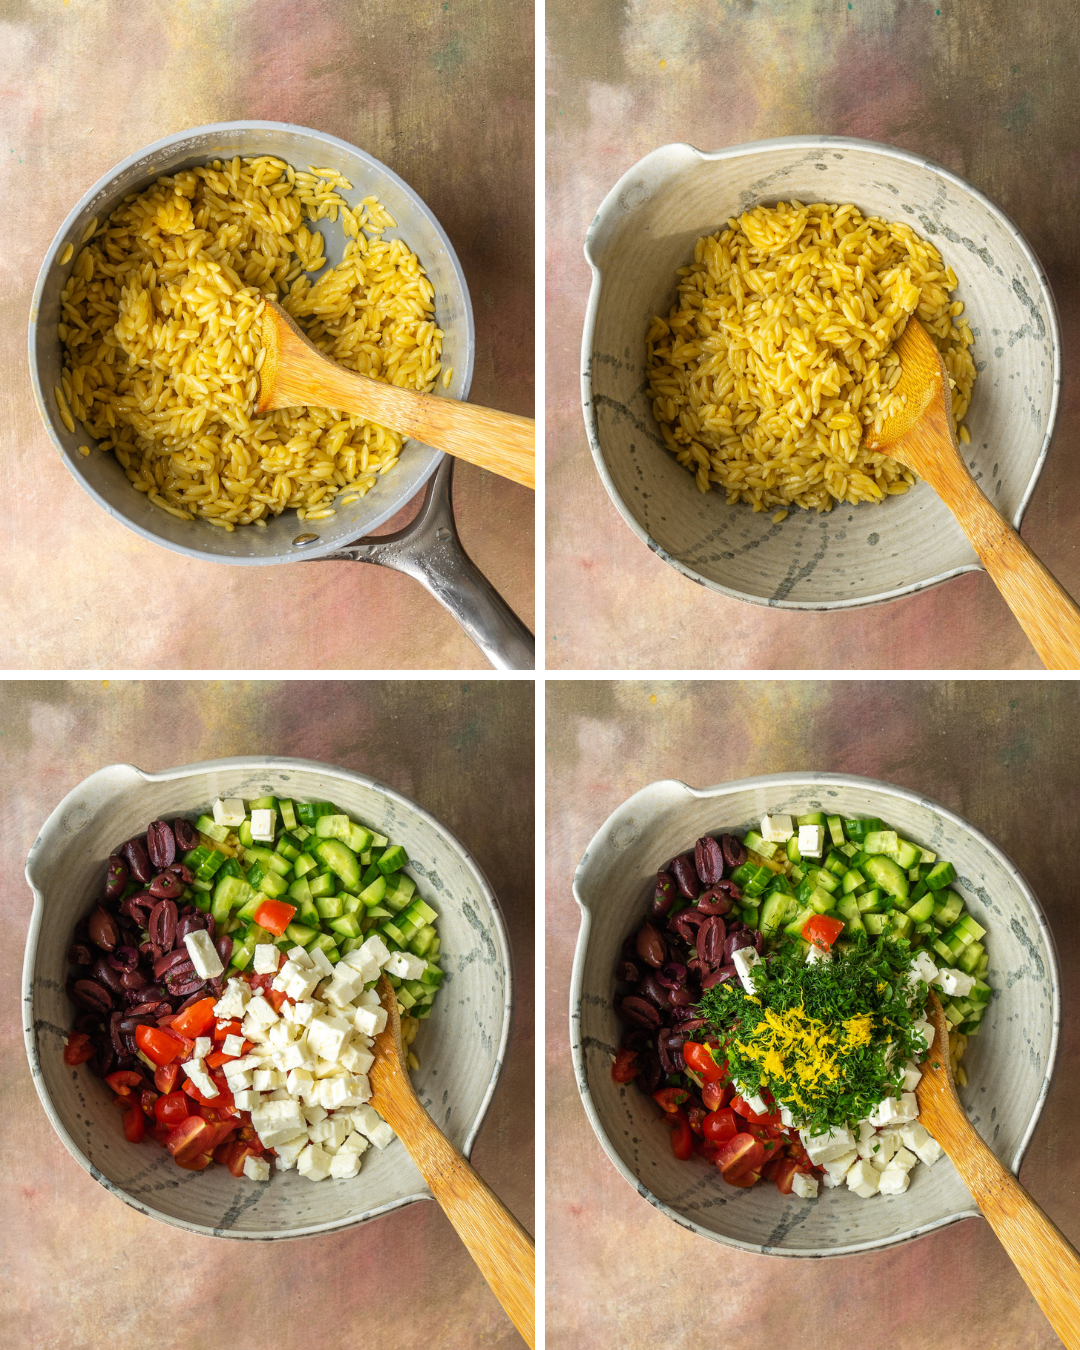 Step by step assembly of mediterranean orzo salad